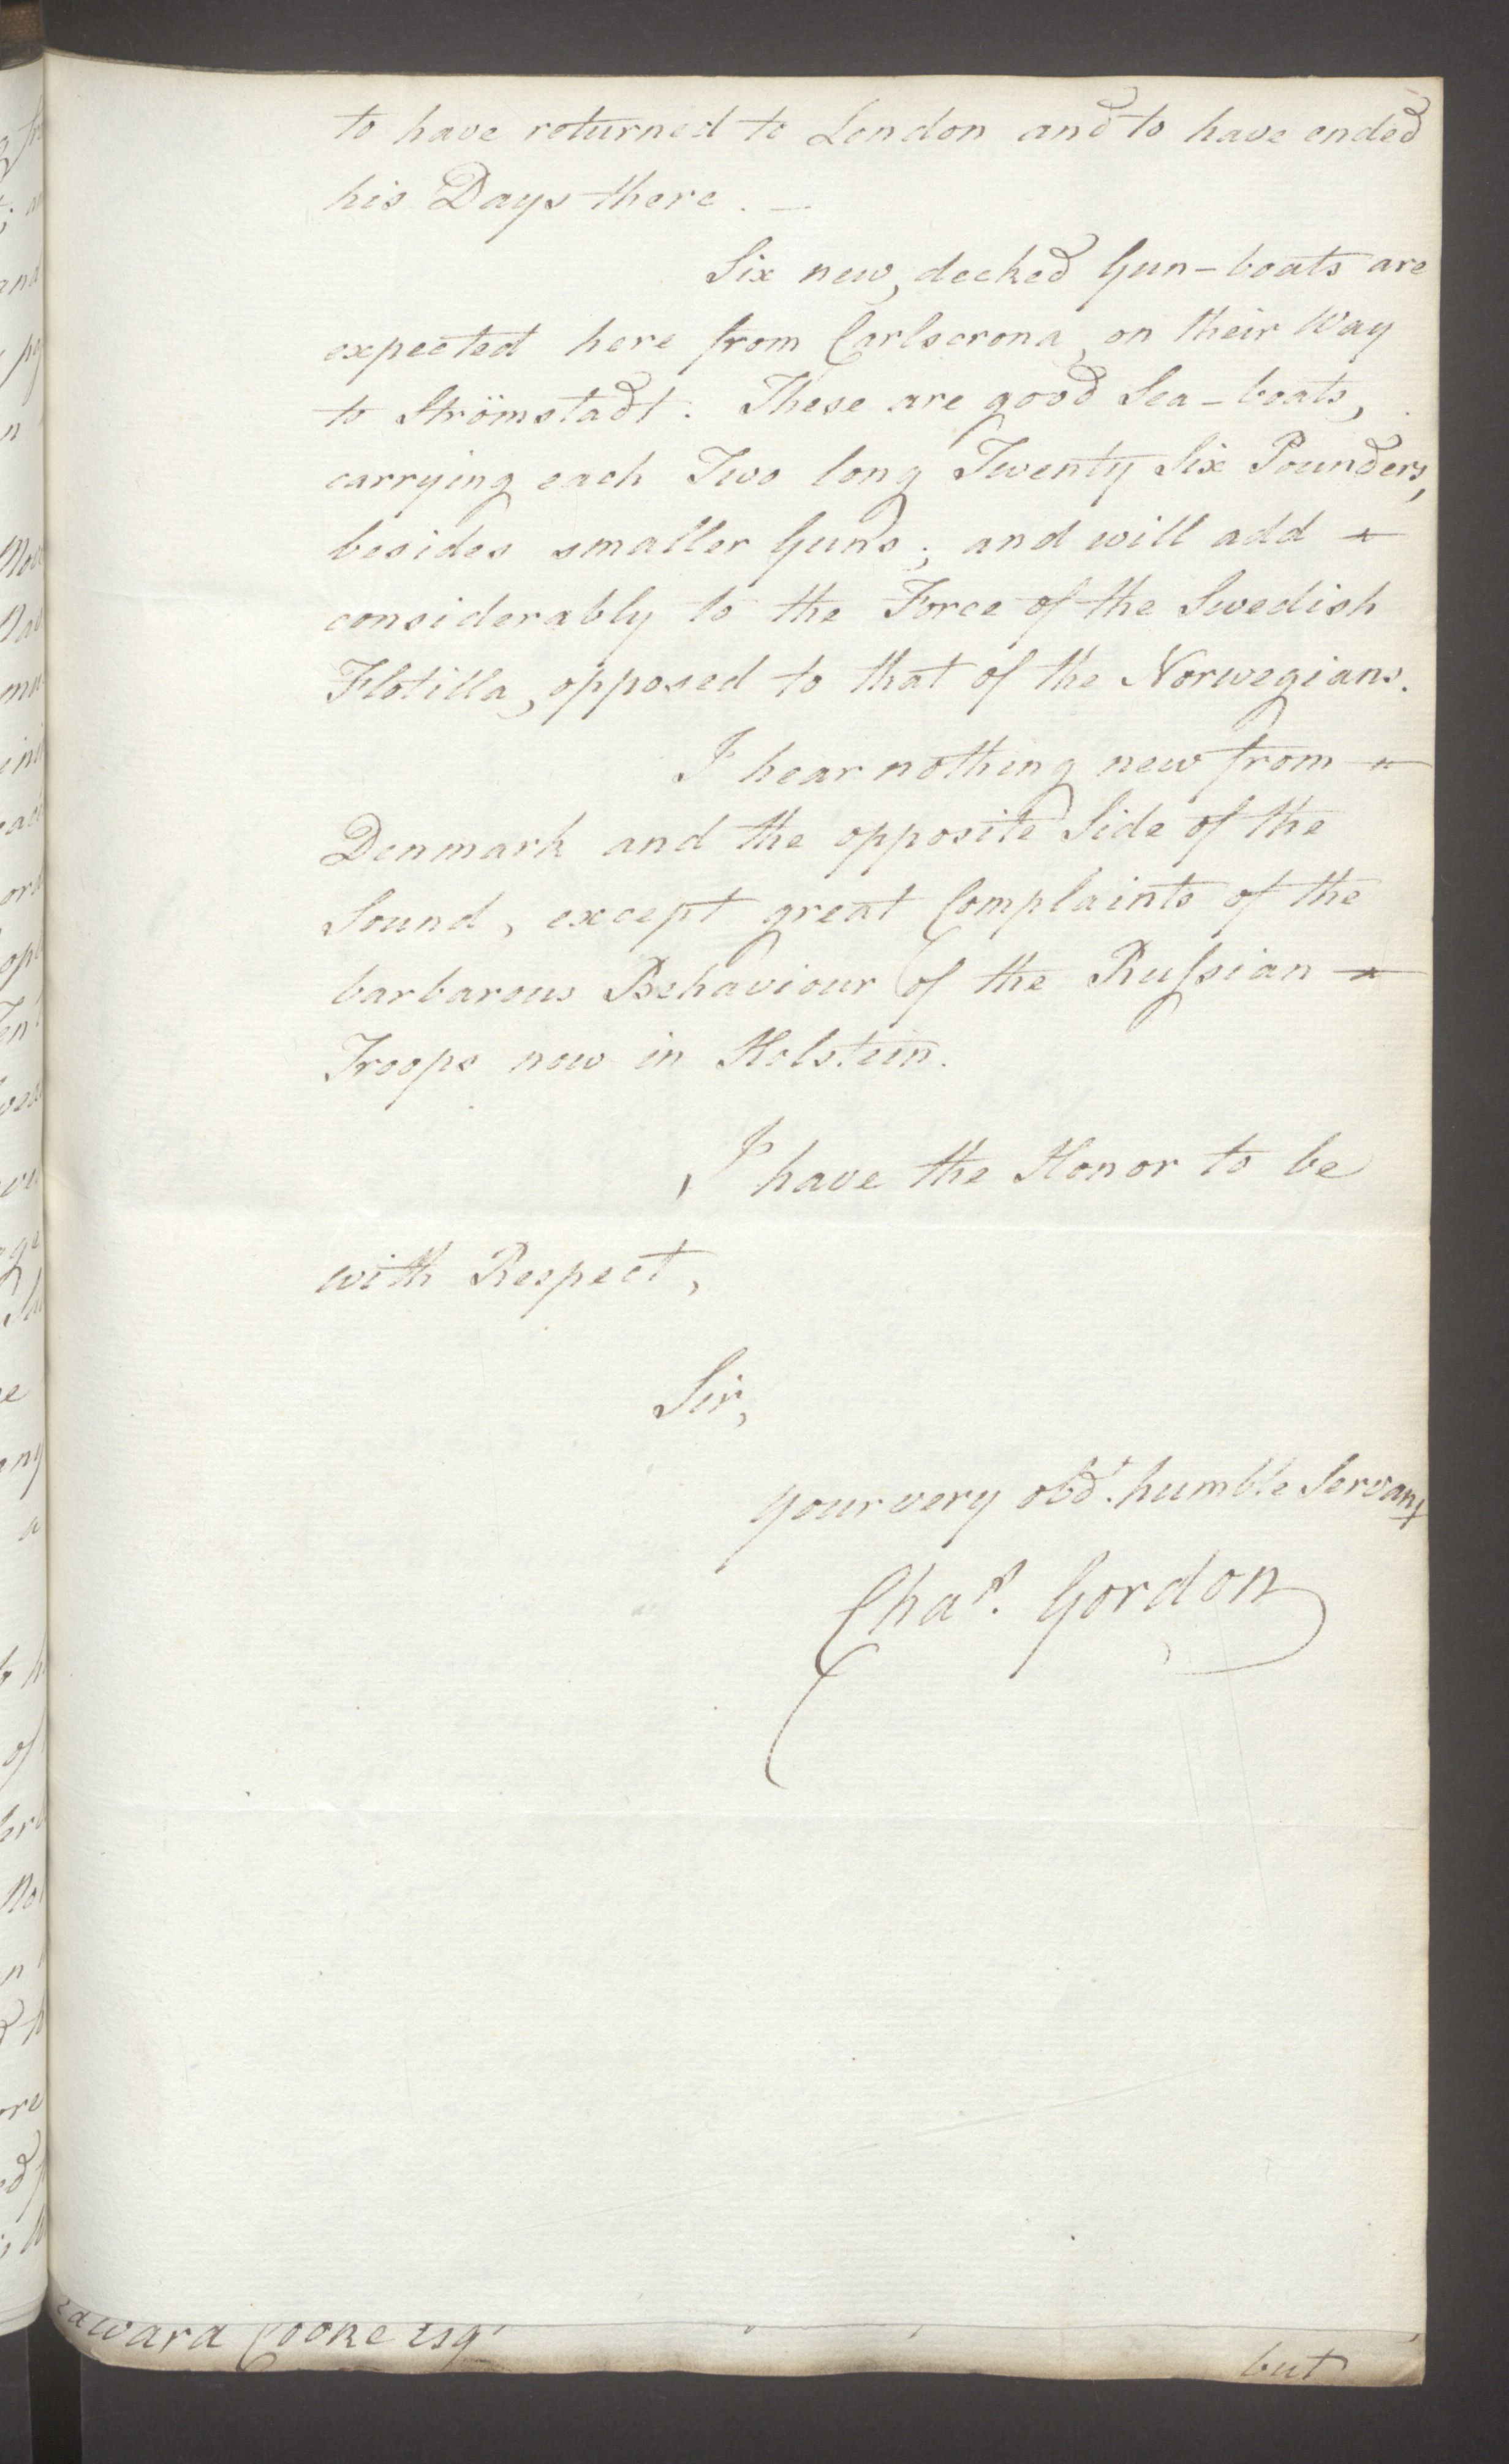 Foreign Office*, UKA/-/FO 38/16: Sir C. Gordon. Reports from Malmö, Jonkoping, and Helsingborg, 1814, s. 73